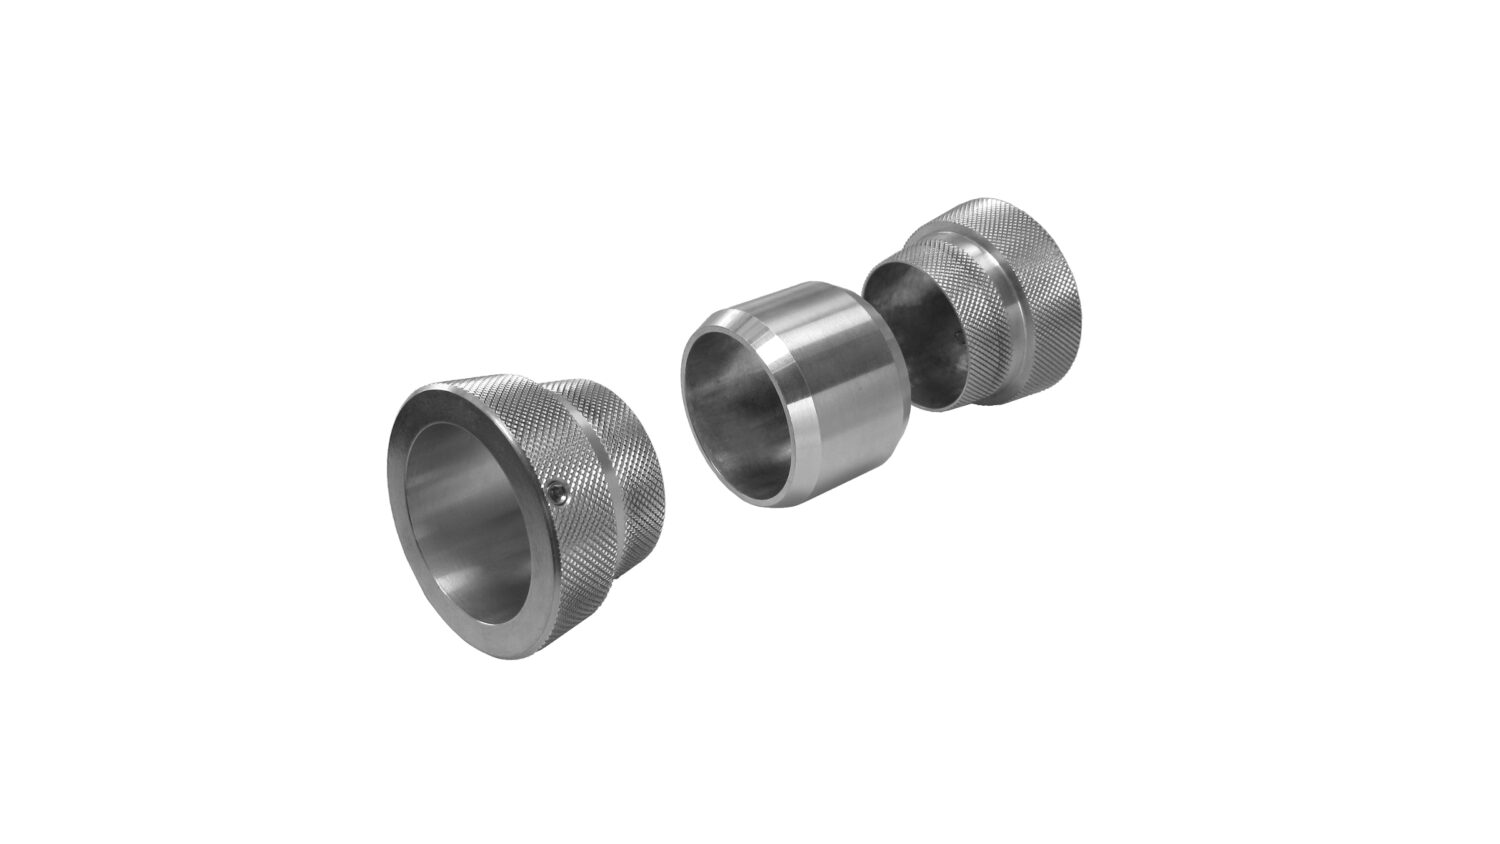 FOBA DAPOR Roll holder fittings for DAPOi